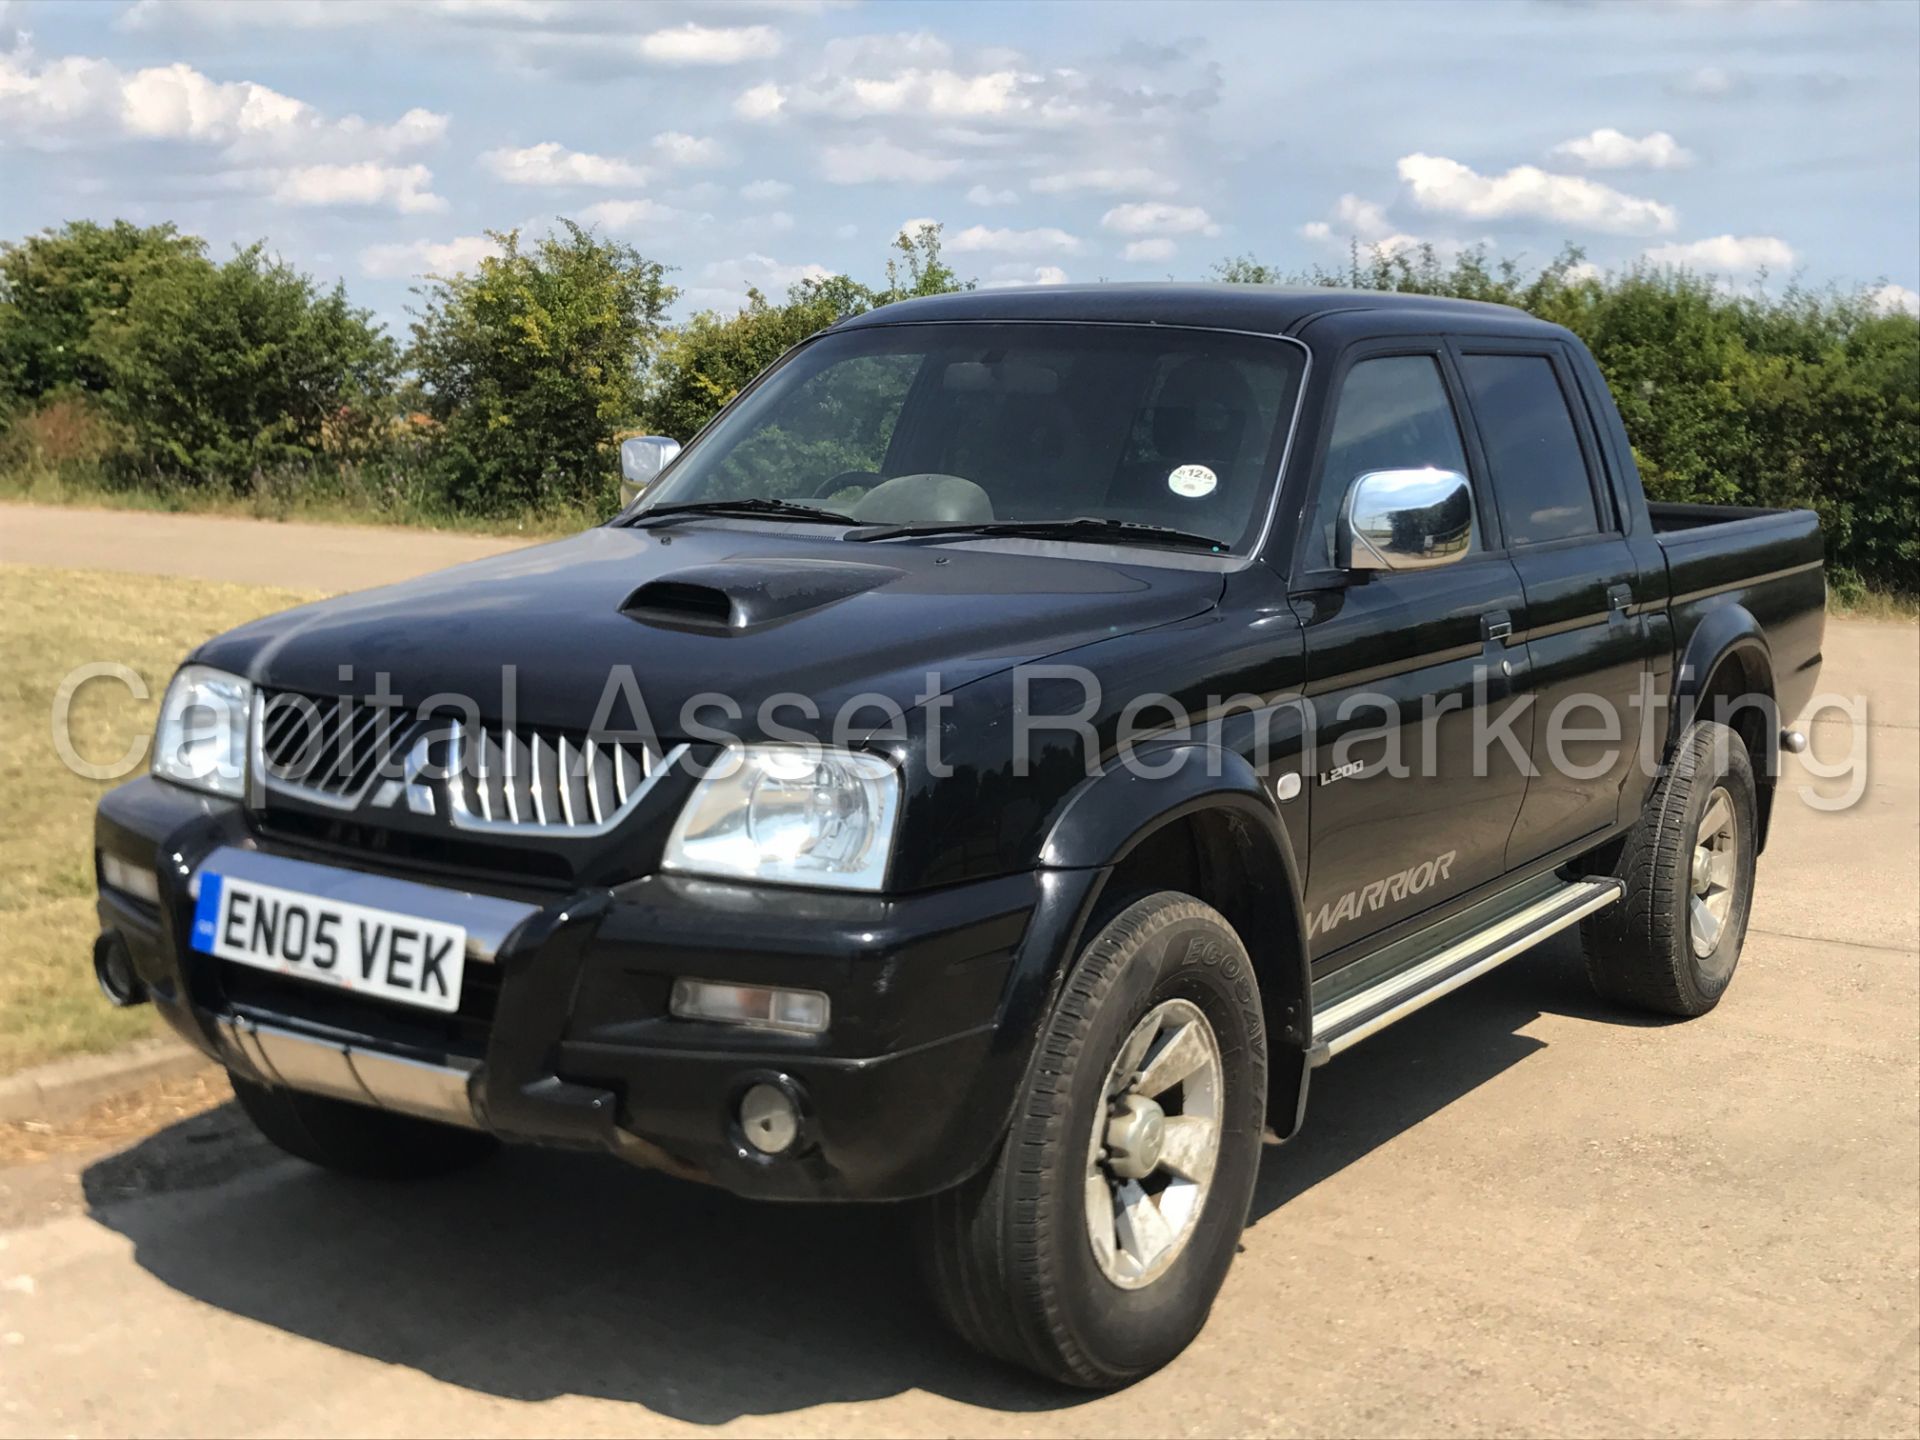 (On Sale) MITSUBISHI L200 'WARRIOR' DOUBLE CAB PICK-UP (2005) '2.5 DIESEL - AIR CON' (NO VAT) - Image 4 of 25